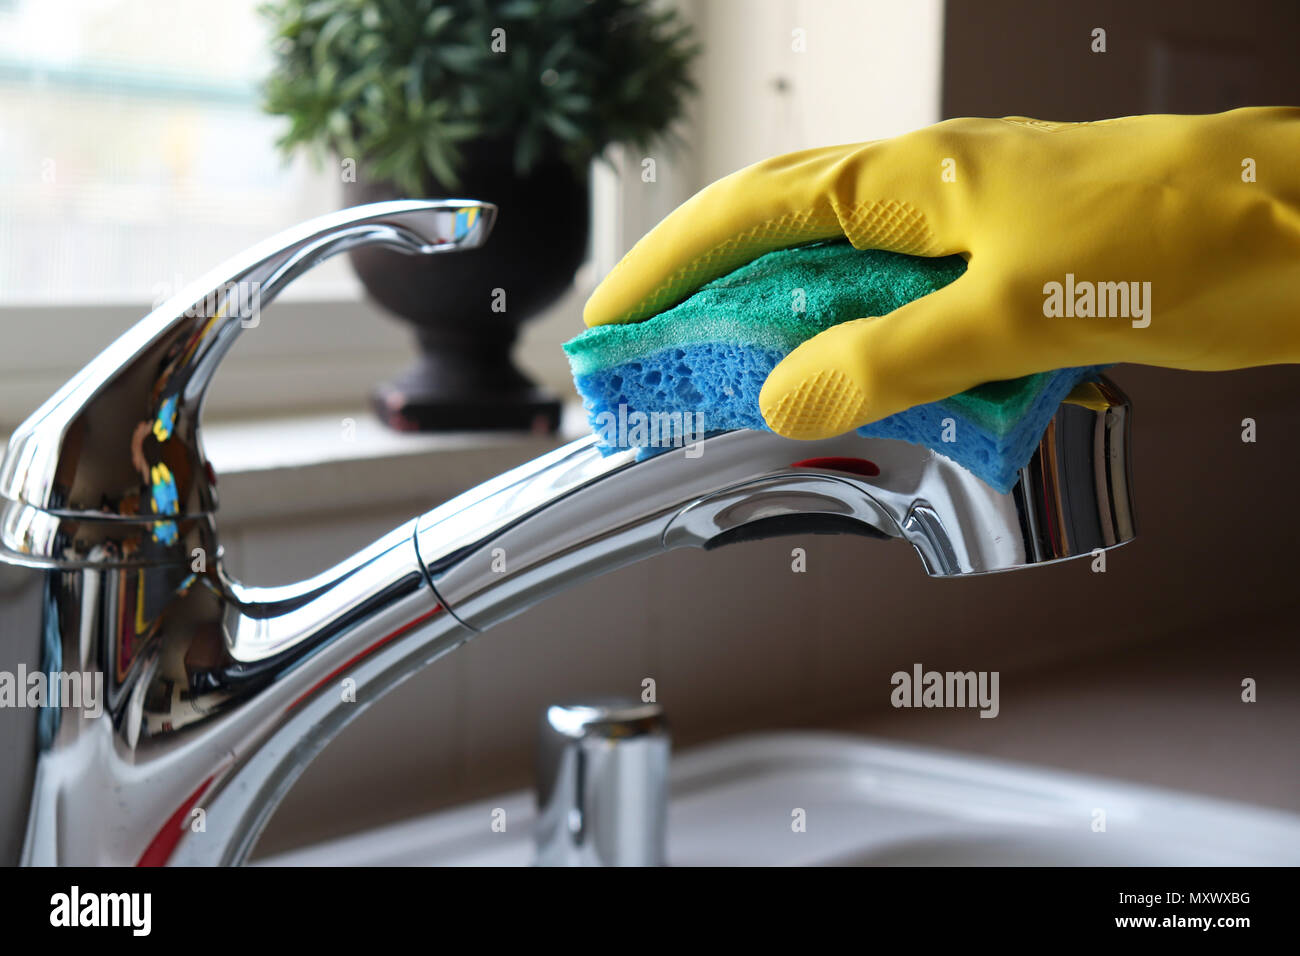 Cleaning the kitchen faucet Stock Photo